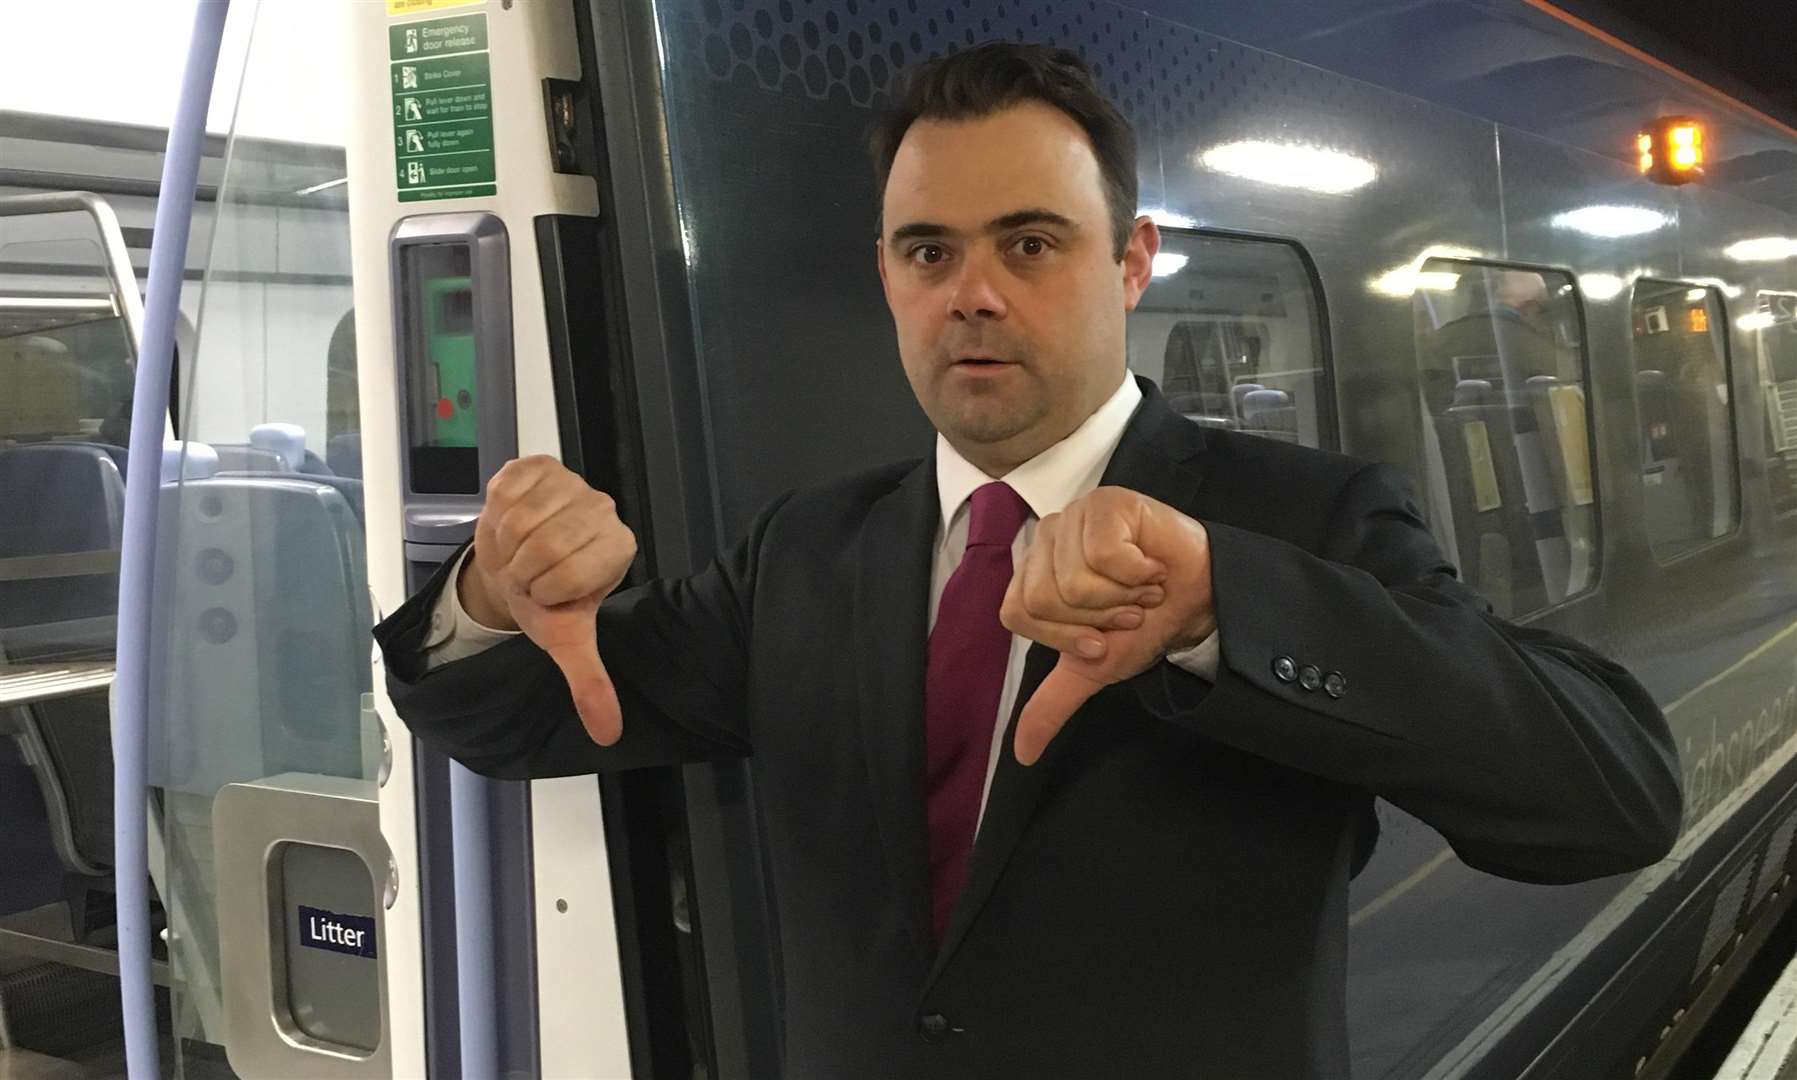 Transport campaigner James Willis has slammed the government for not revealing details behind plans to cut Maidstone's high speed trains to the capital